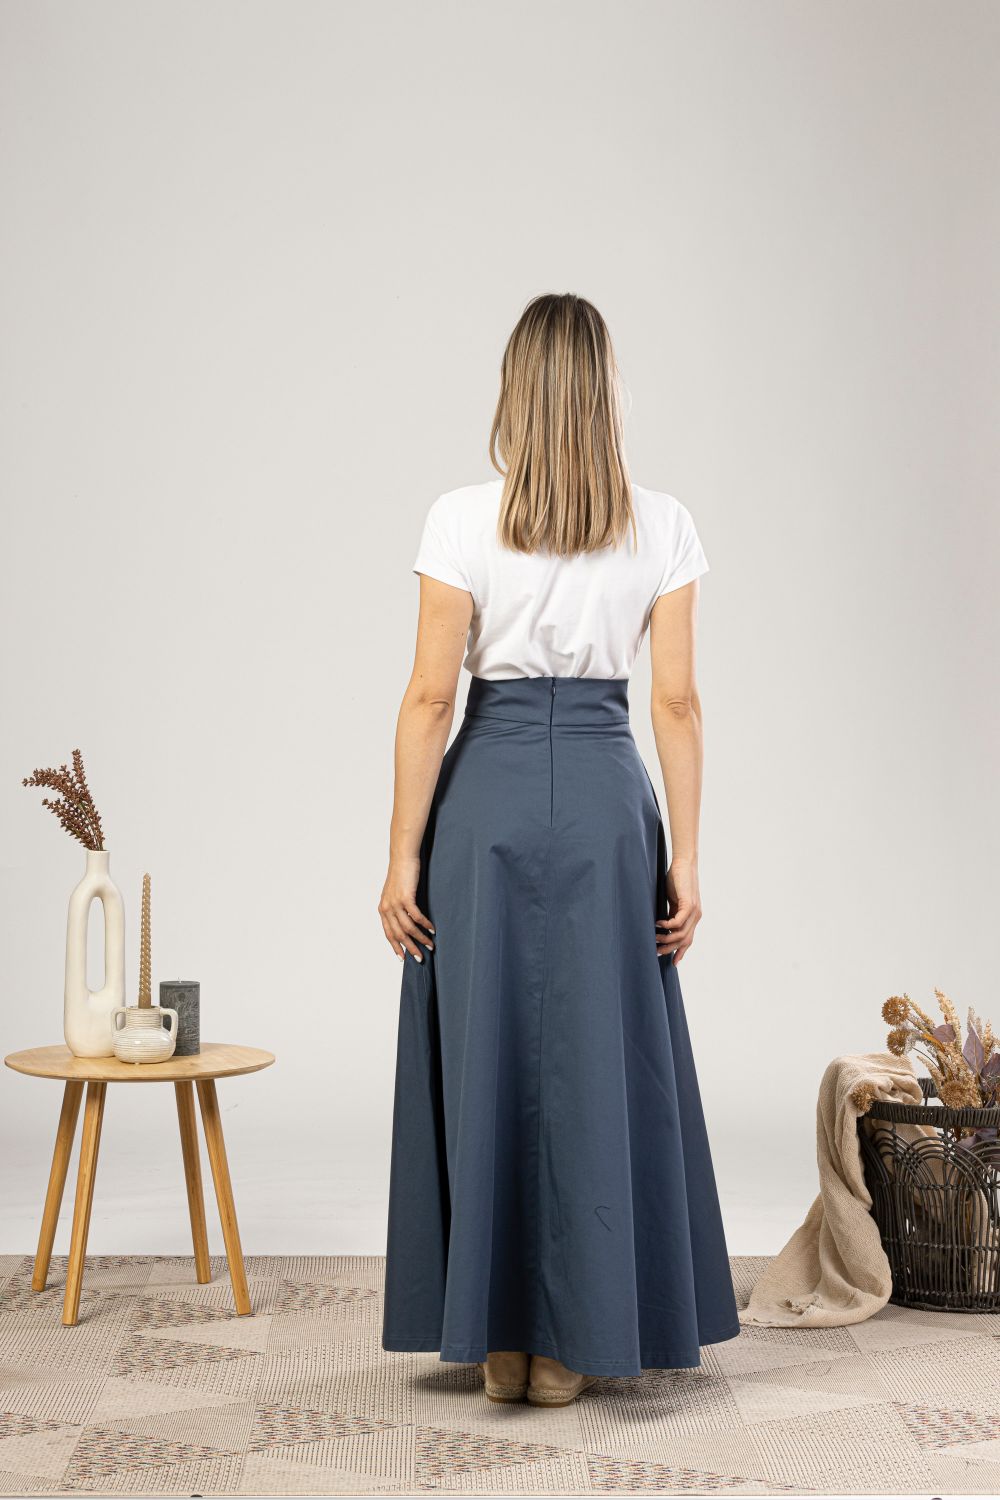 Gentle Bell-Shaped Summer Skirt from the back view - from NikkaPlace | Effortless fashion for easy living